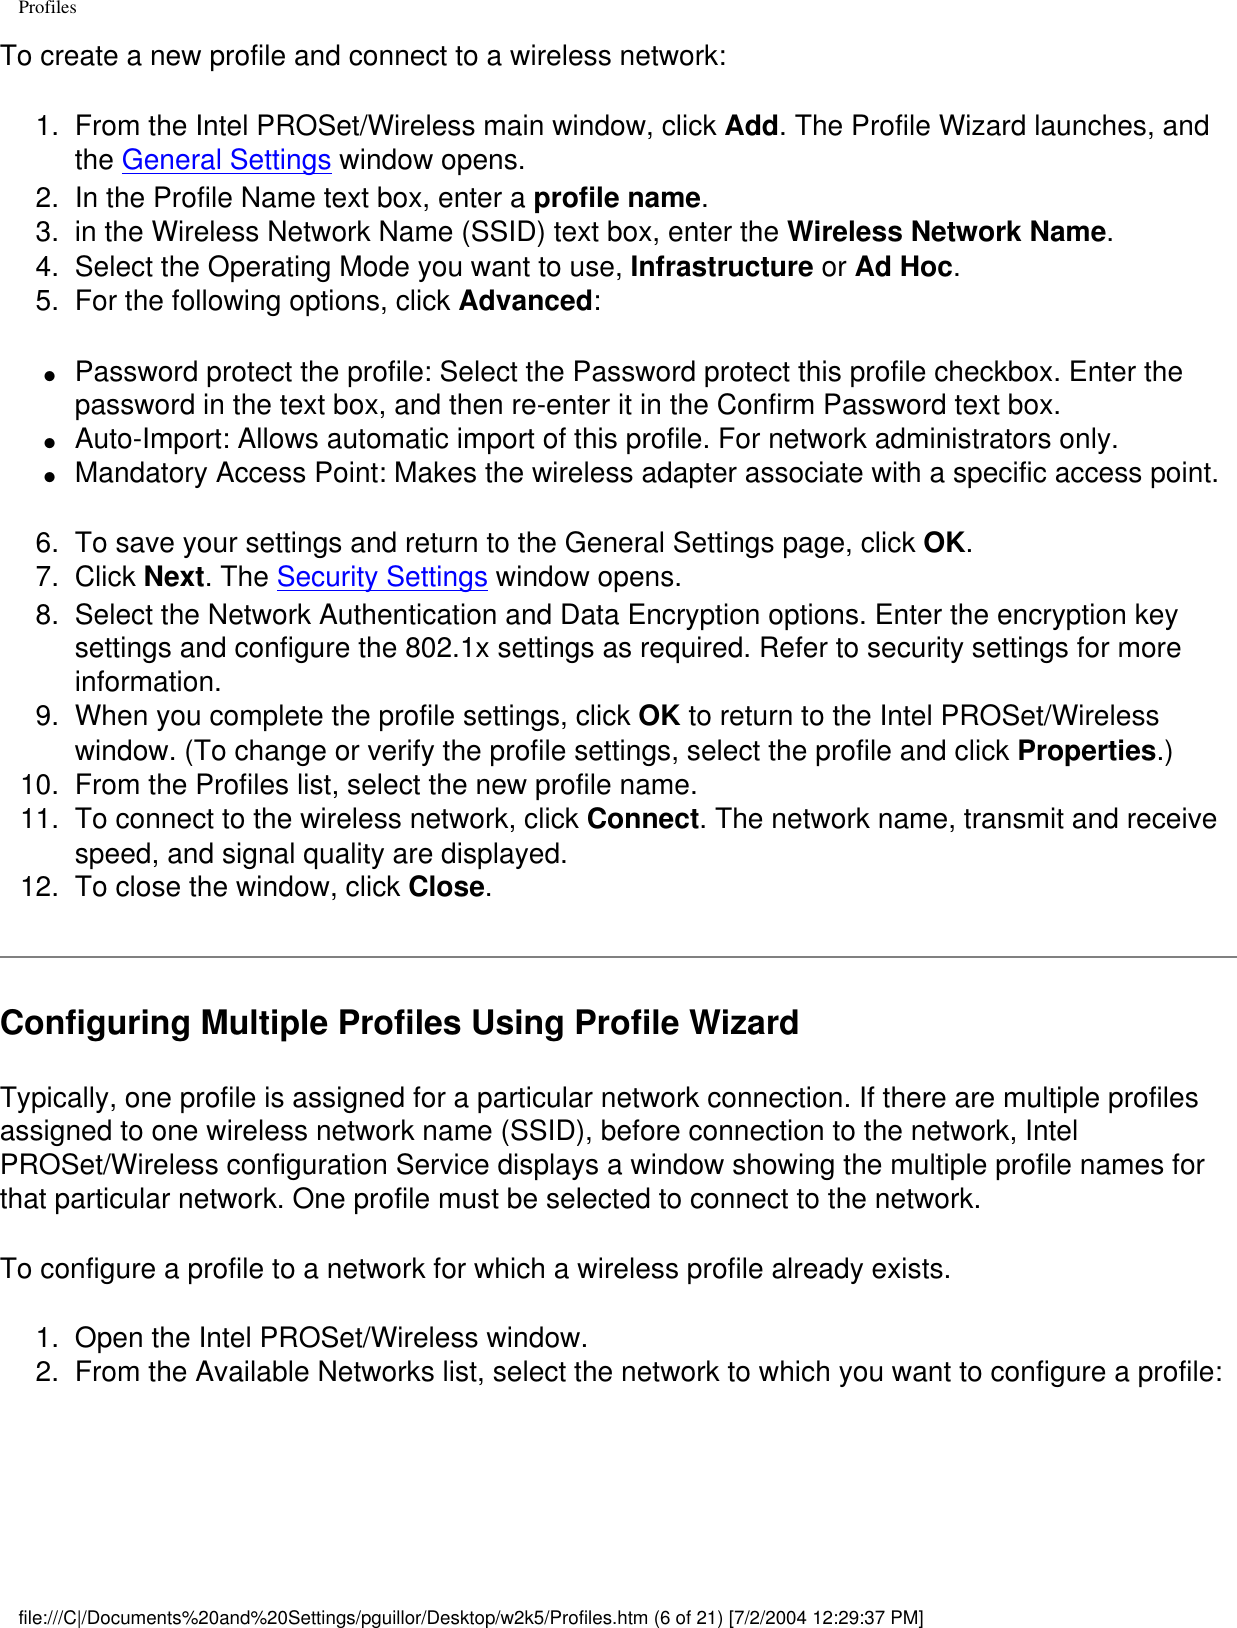 ProfilesTo create a new profile and connect to a wireless network:1.  From the Intel PROSet/Wireless main window, click Add. The Profile Wizard launches, and the General Settings window opens.2.  In the Profile Name text box, enter a profile name.3.  in the Wireless Network Name (SSID) text box, enter the Wireless Network Name. 4.  Select the Operating Mode you want to use, Infrastructure or Ad Hoc.5.  For the following options, click Advanced:●     Password protect the profile: Select the Password protect this profile checkbox. Enter the password in the text box, and then re-enter it in the Confirm Password text box.●     Auto-Import: Allows automatic import of this profile. For network administrators only.●     Mandatory Access Point: Makes the wireless adapter associate with a specific access point.6.  To save your settings and return to the General Settings page, click OK.7.  Click Next. The Security Settings window opens.8.  Select the Network Authentication and Data Encryption options. Enter the encryption key settings and configure the 802.1x settings as required. Refer to security settings for more information.9.  When you complete the profile settings, click OK to return to the Intel PROSet/Wireless window. (To change or verify the profile settings, select the profile and click Properties.)10.  From the Profiles list, select the new profile name.11.  To connect to the wireless network, click Connect. The network name, transmit and receive speed, and signal quality are displayed.12.  To close the window, click Close.Configuring Multiple Profiles Using Profile WizardTypically, one profile is assigned for a particular network connection. If there are multiple profiles assigned to one wireless network name (SSID), before connection to the network, Intel PROSet/Wireless configuration Service displays a window showing the multiple profile names for that particular network. One profile must be selected to connect to the network. To configure a profile to a network for which a wireless profile already exists. 1.  Open the Intel PROSet/Wireless window.2.  From the Available Networks list, select the network to which you want to configure a profile:file:///C|/Documents%20and%20Settings/pguillor/Desktop/w2k5/Profiles.htm (6 of 21) [7/2/2004 12:29:37 PM]